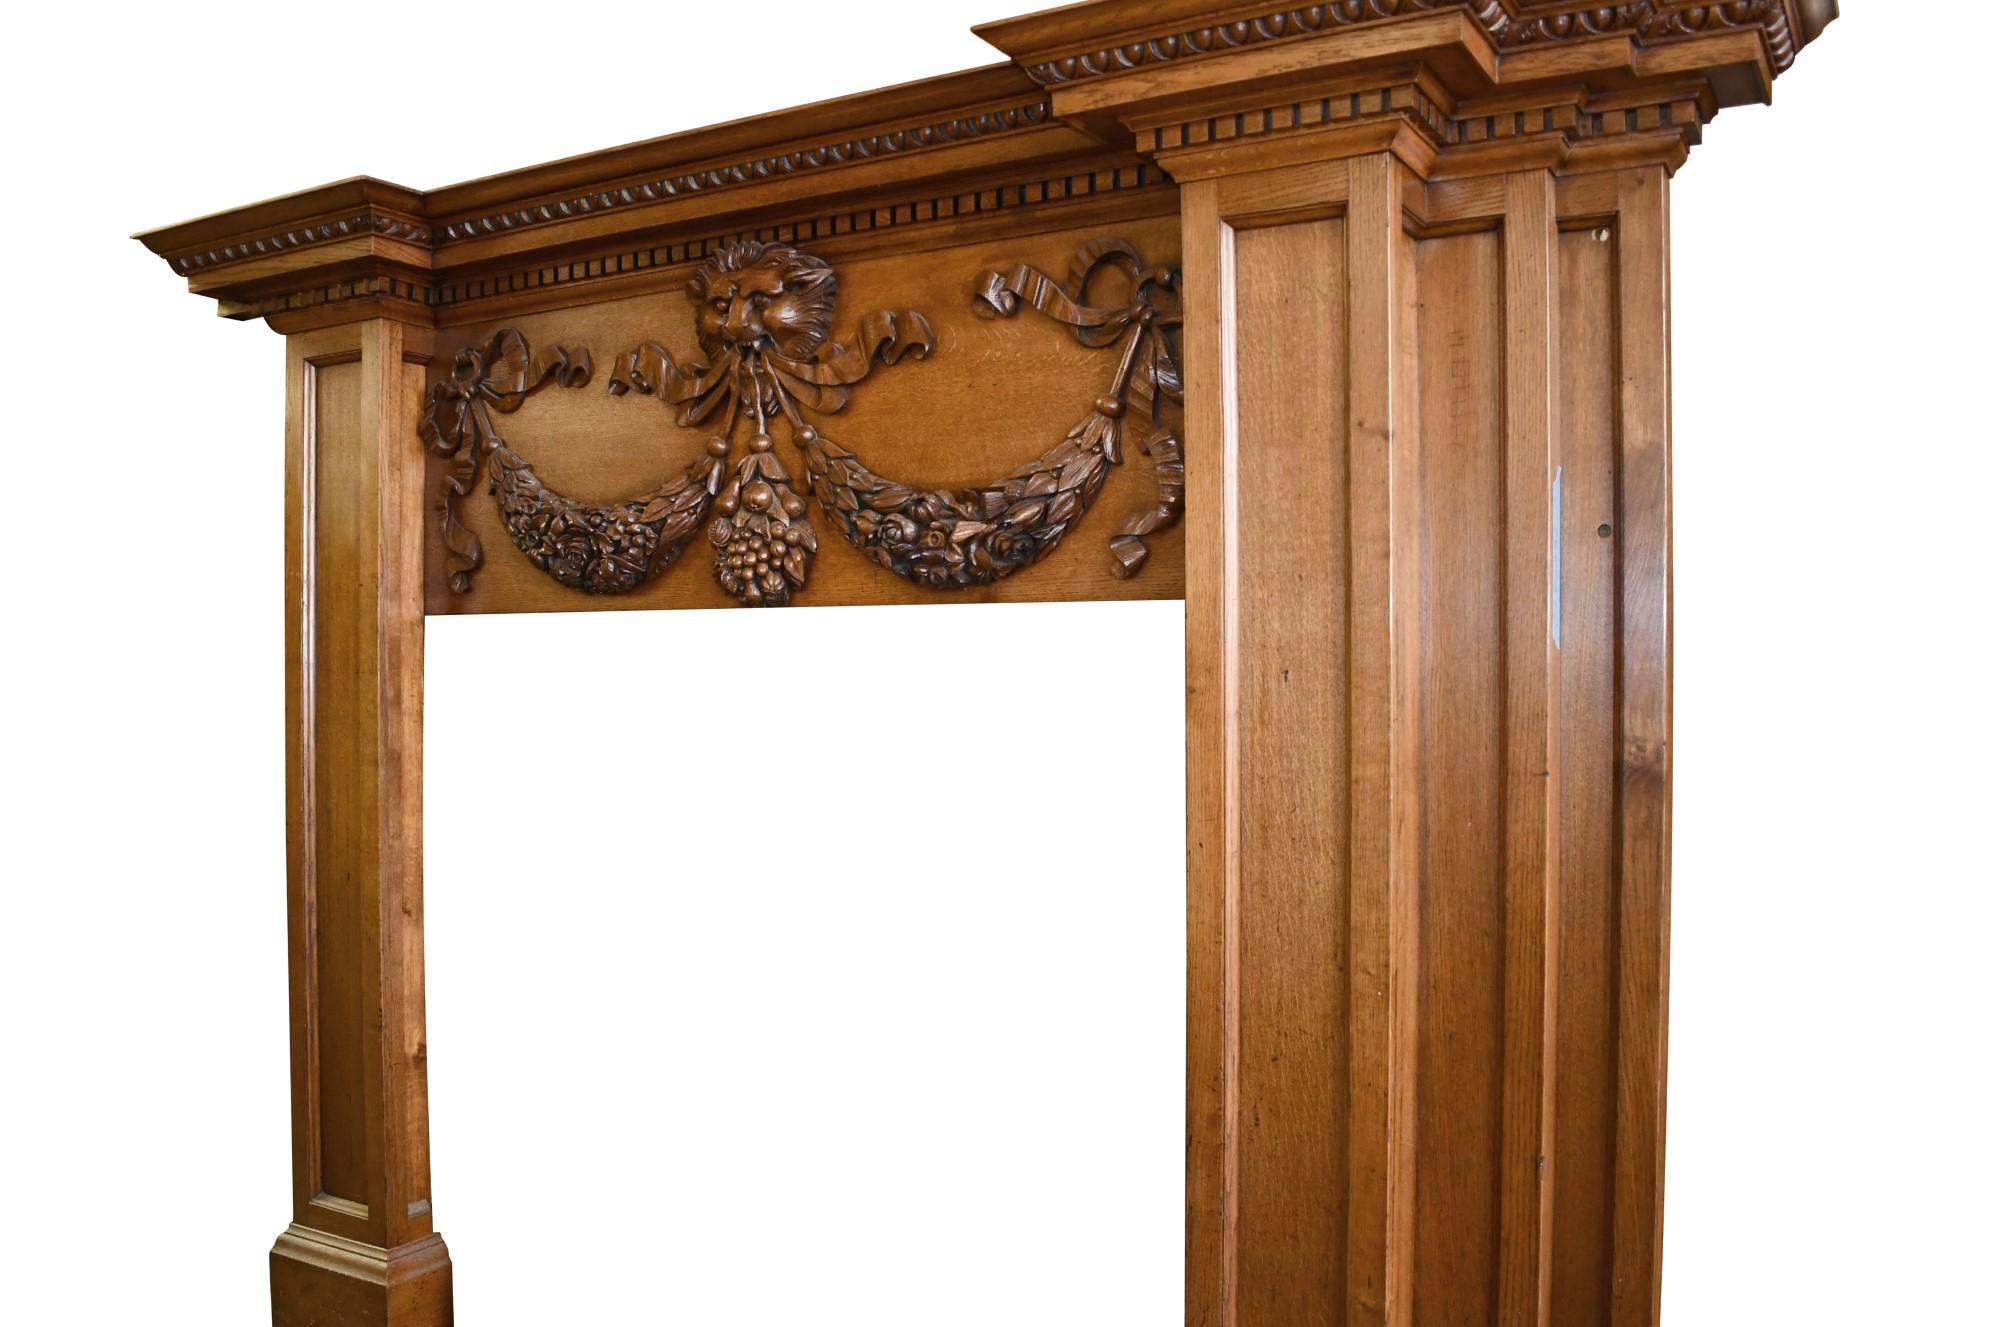 1800s English Regency Style Carved Oak Tall Mantel with Lion, Ribbon and Swags In Good Condition For Sale In New York, NY